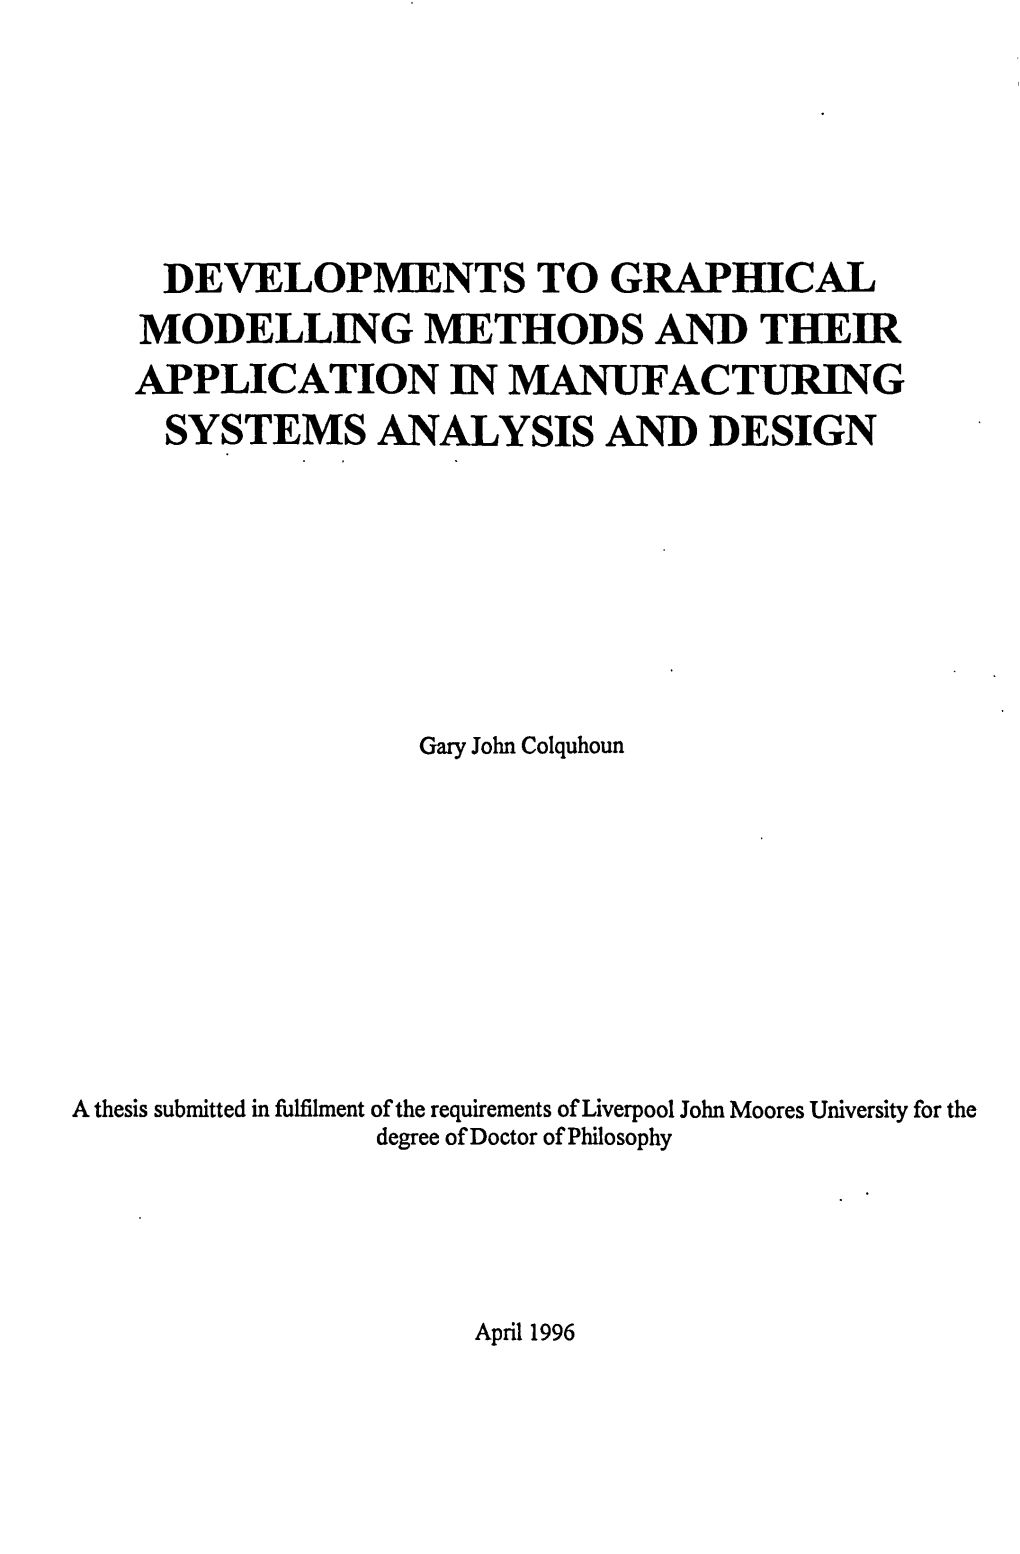 Gary John Colquhoun a Thesis Submitted in Fulfilment of The